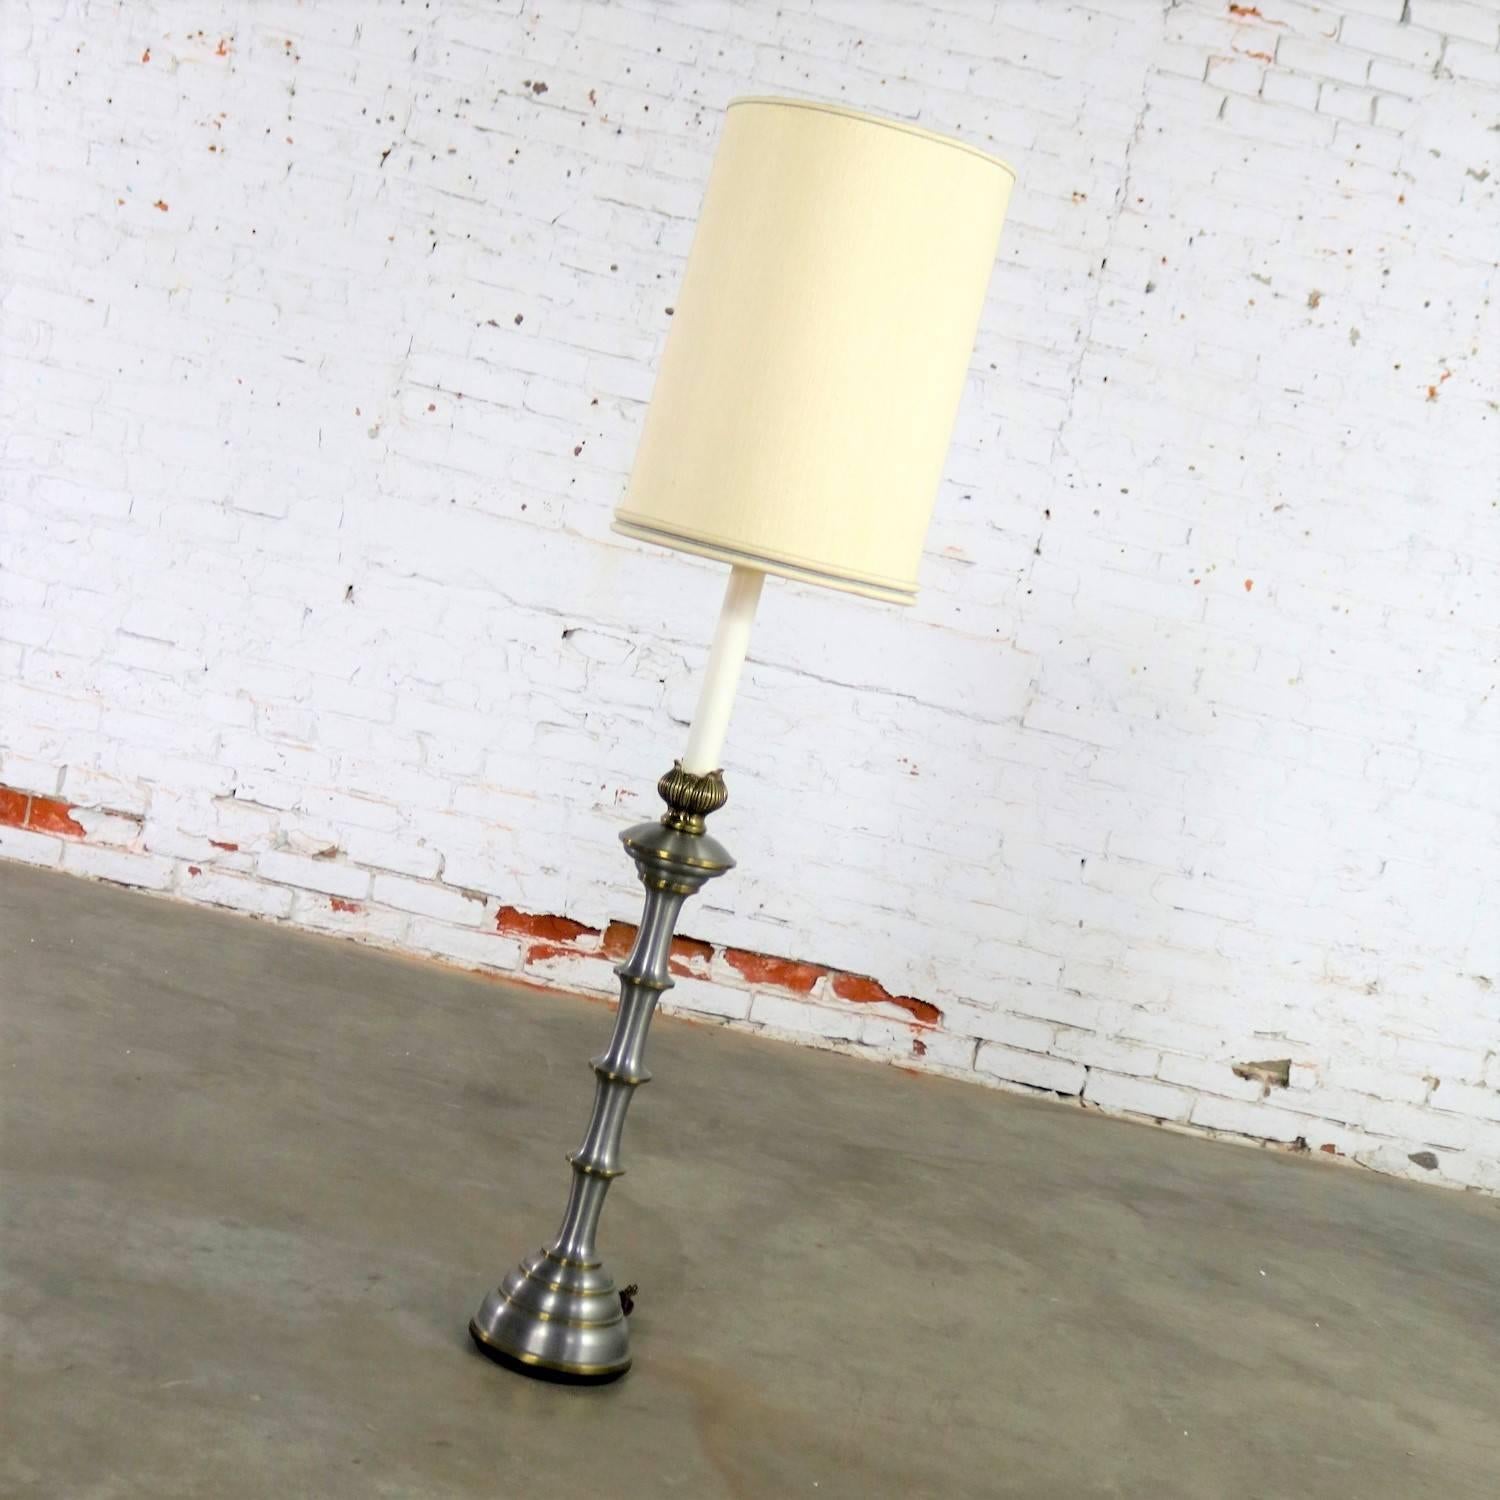 Handsome and versatile Stiffel lamp comprised of brass and brushed stainless steel. It can be used as an over-scaled table lamp or a lower than usual floor lamp. It is in fabulous vintage condition and comes with its original existing cream tall and